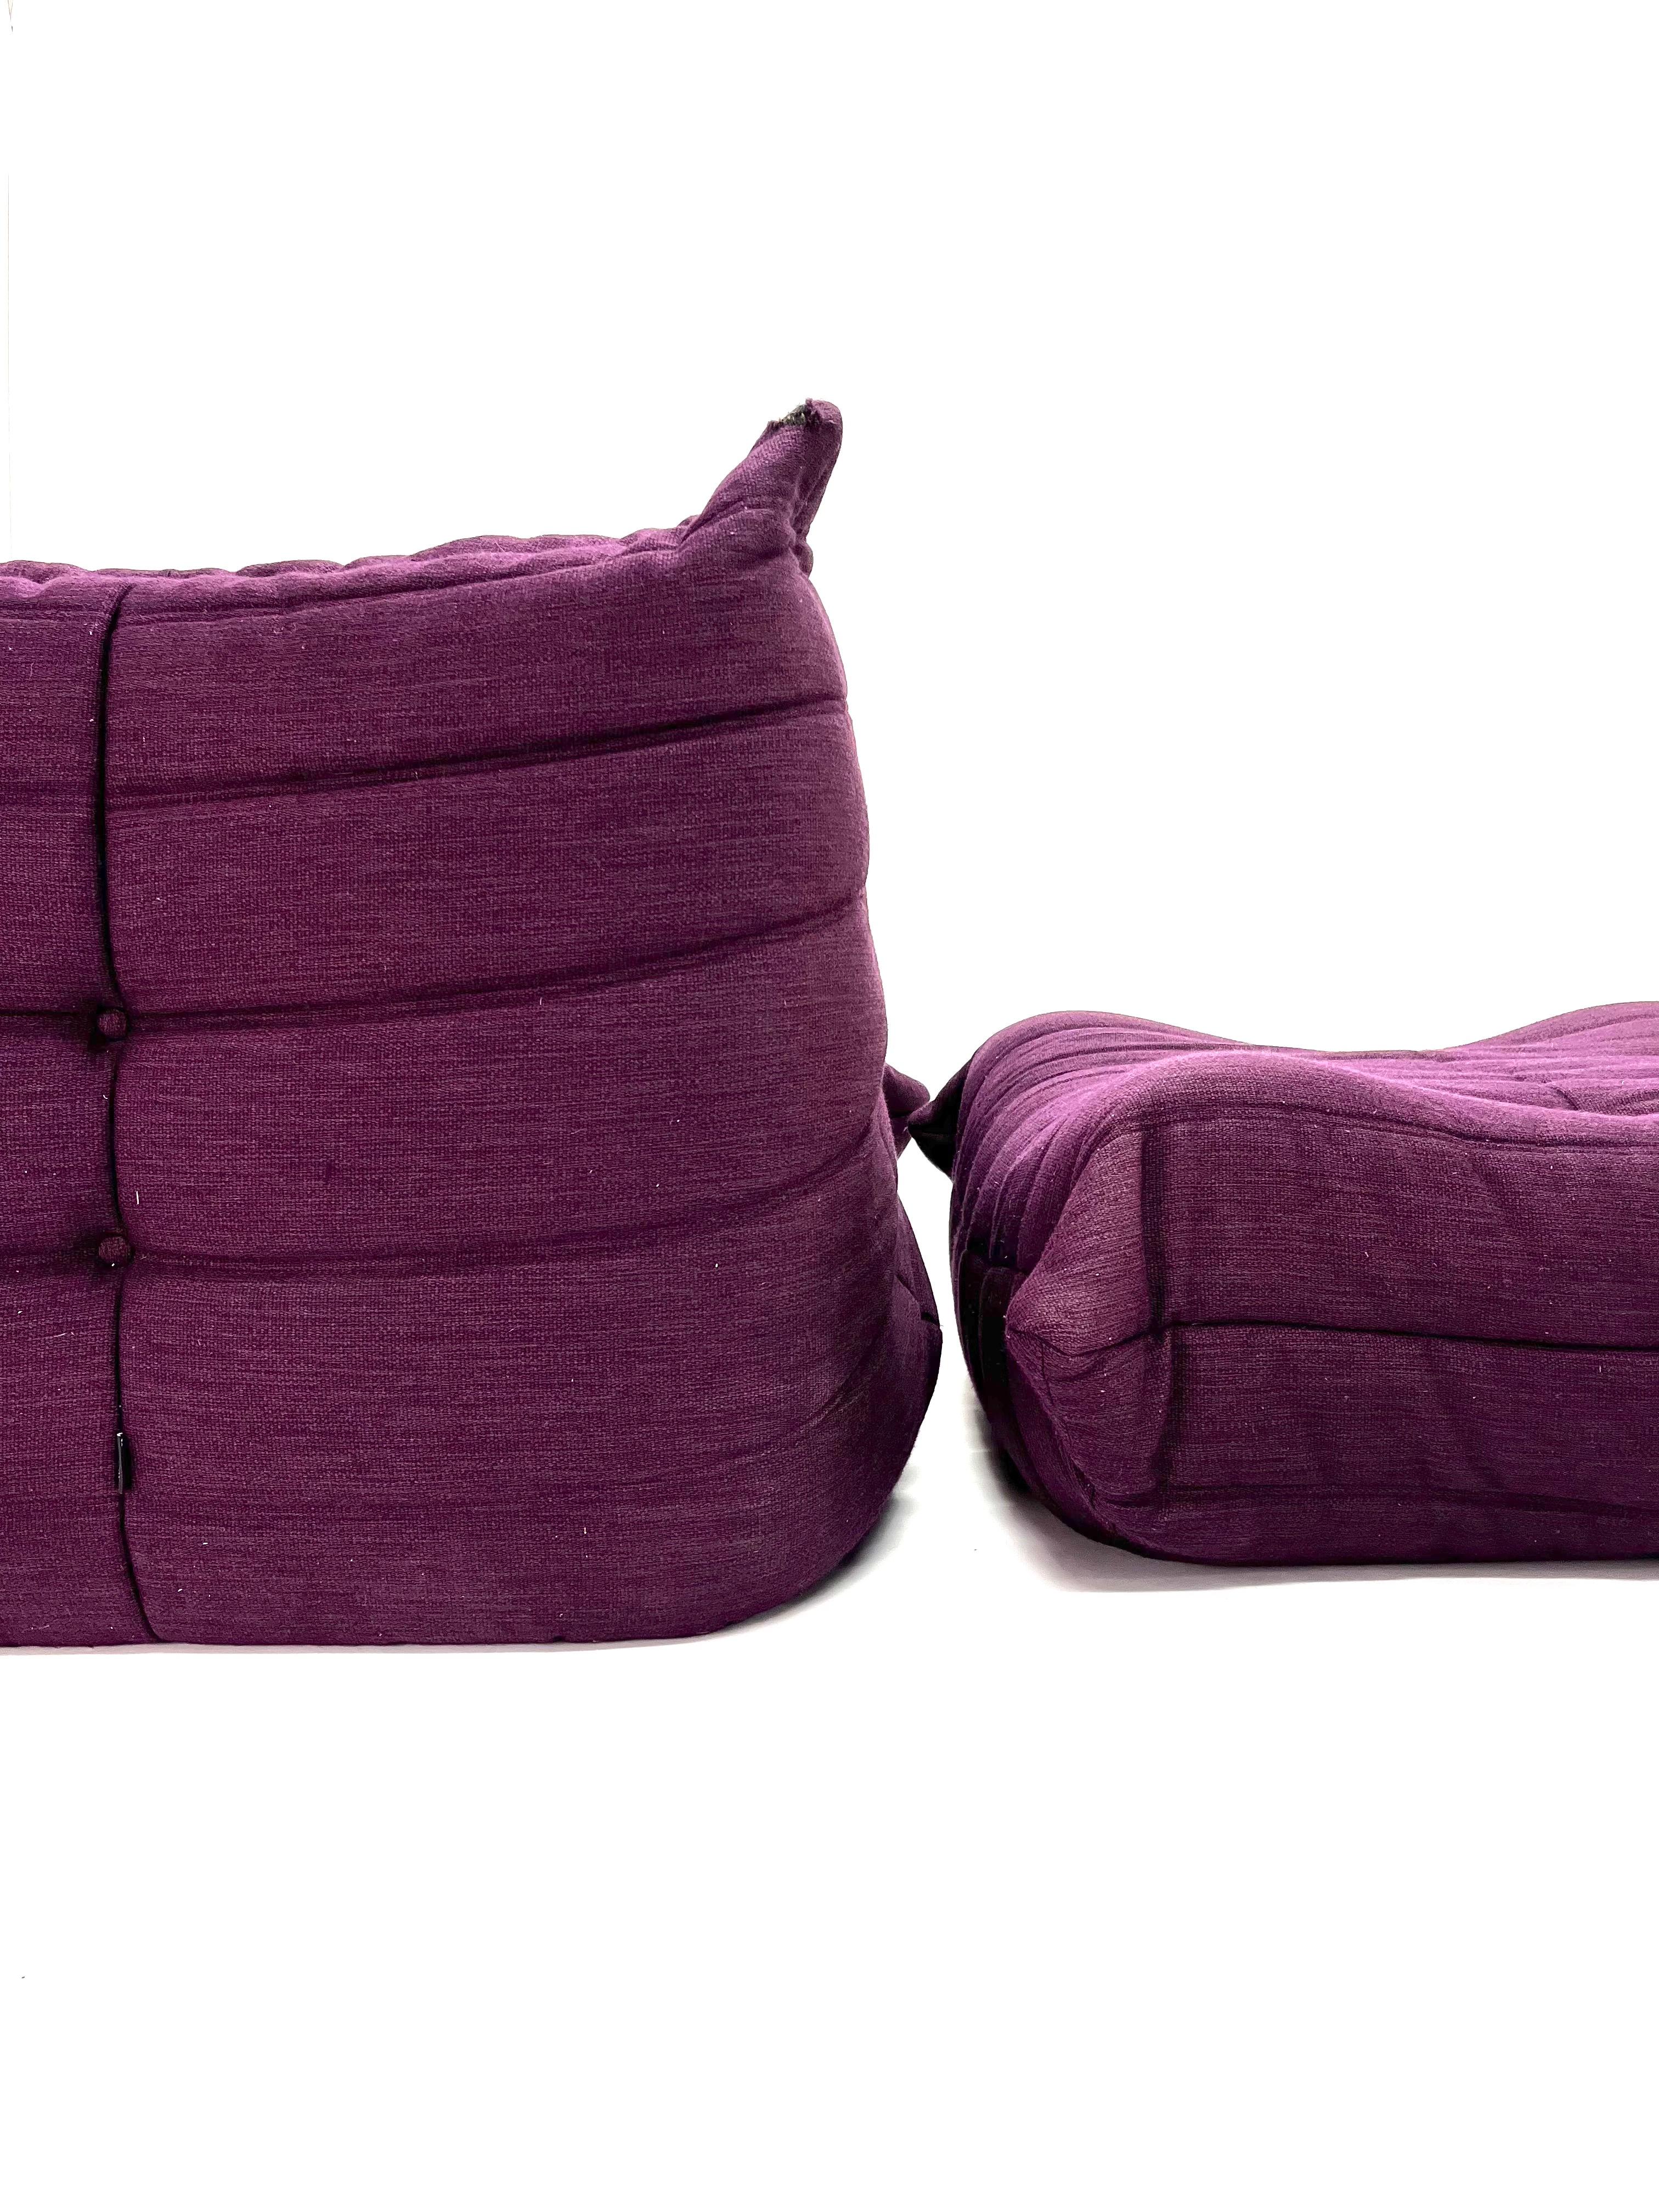 Togo Chair and Ottoman in Purple by Michel Ducaroy for Ligne Roset For Sale 9